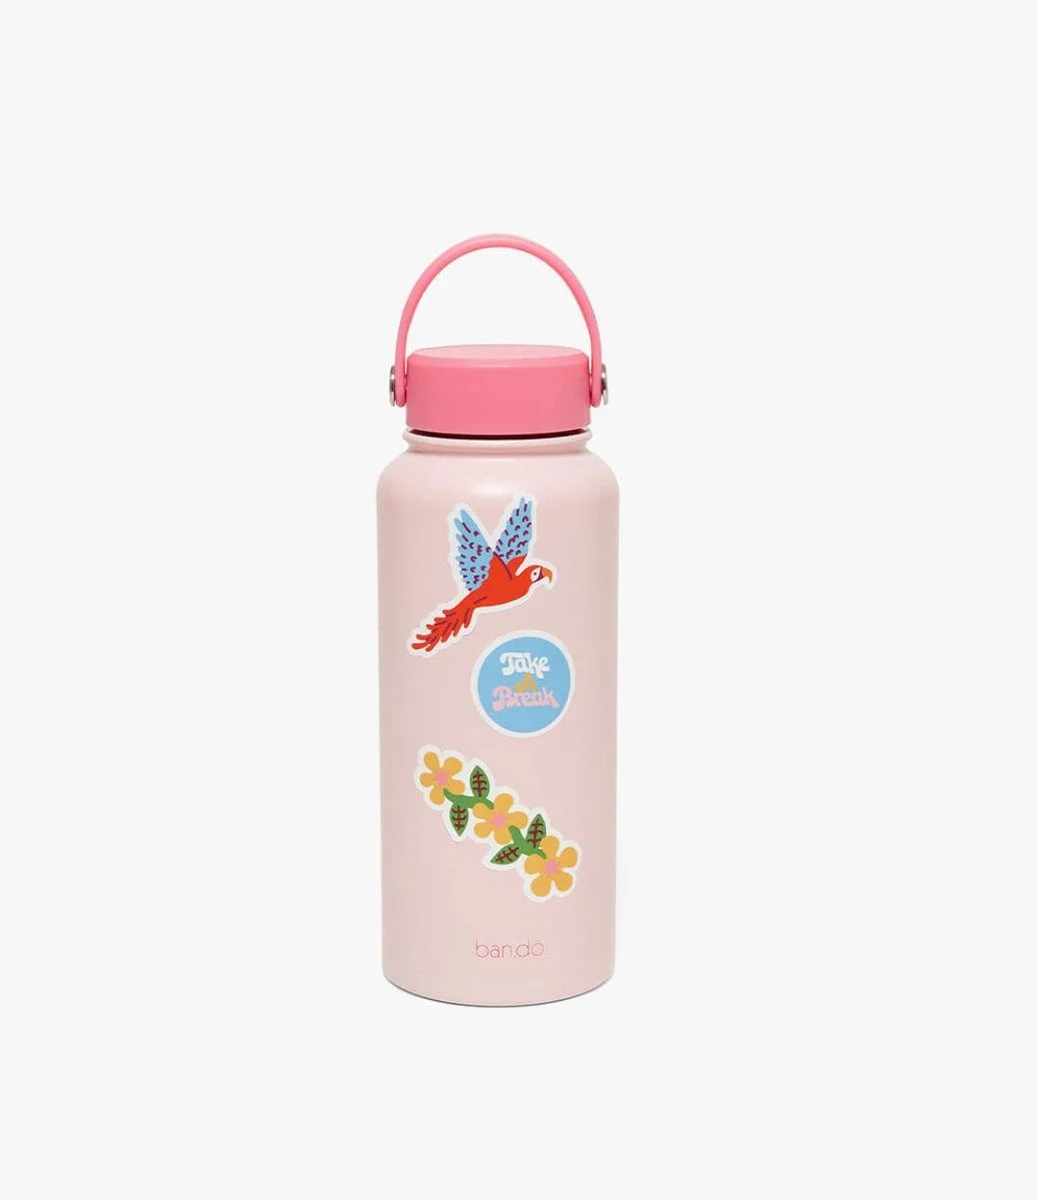 Stainless Steel Water Bottle, Enjoy the Little Things by Ban.do